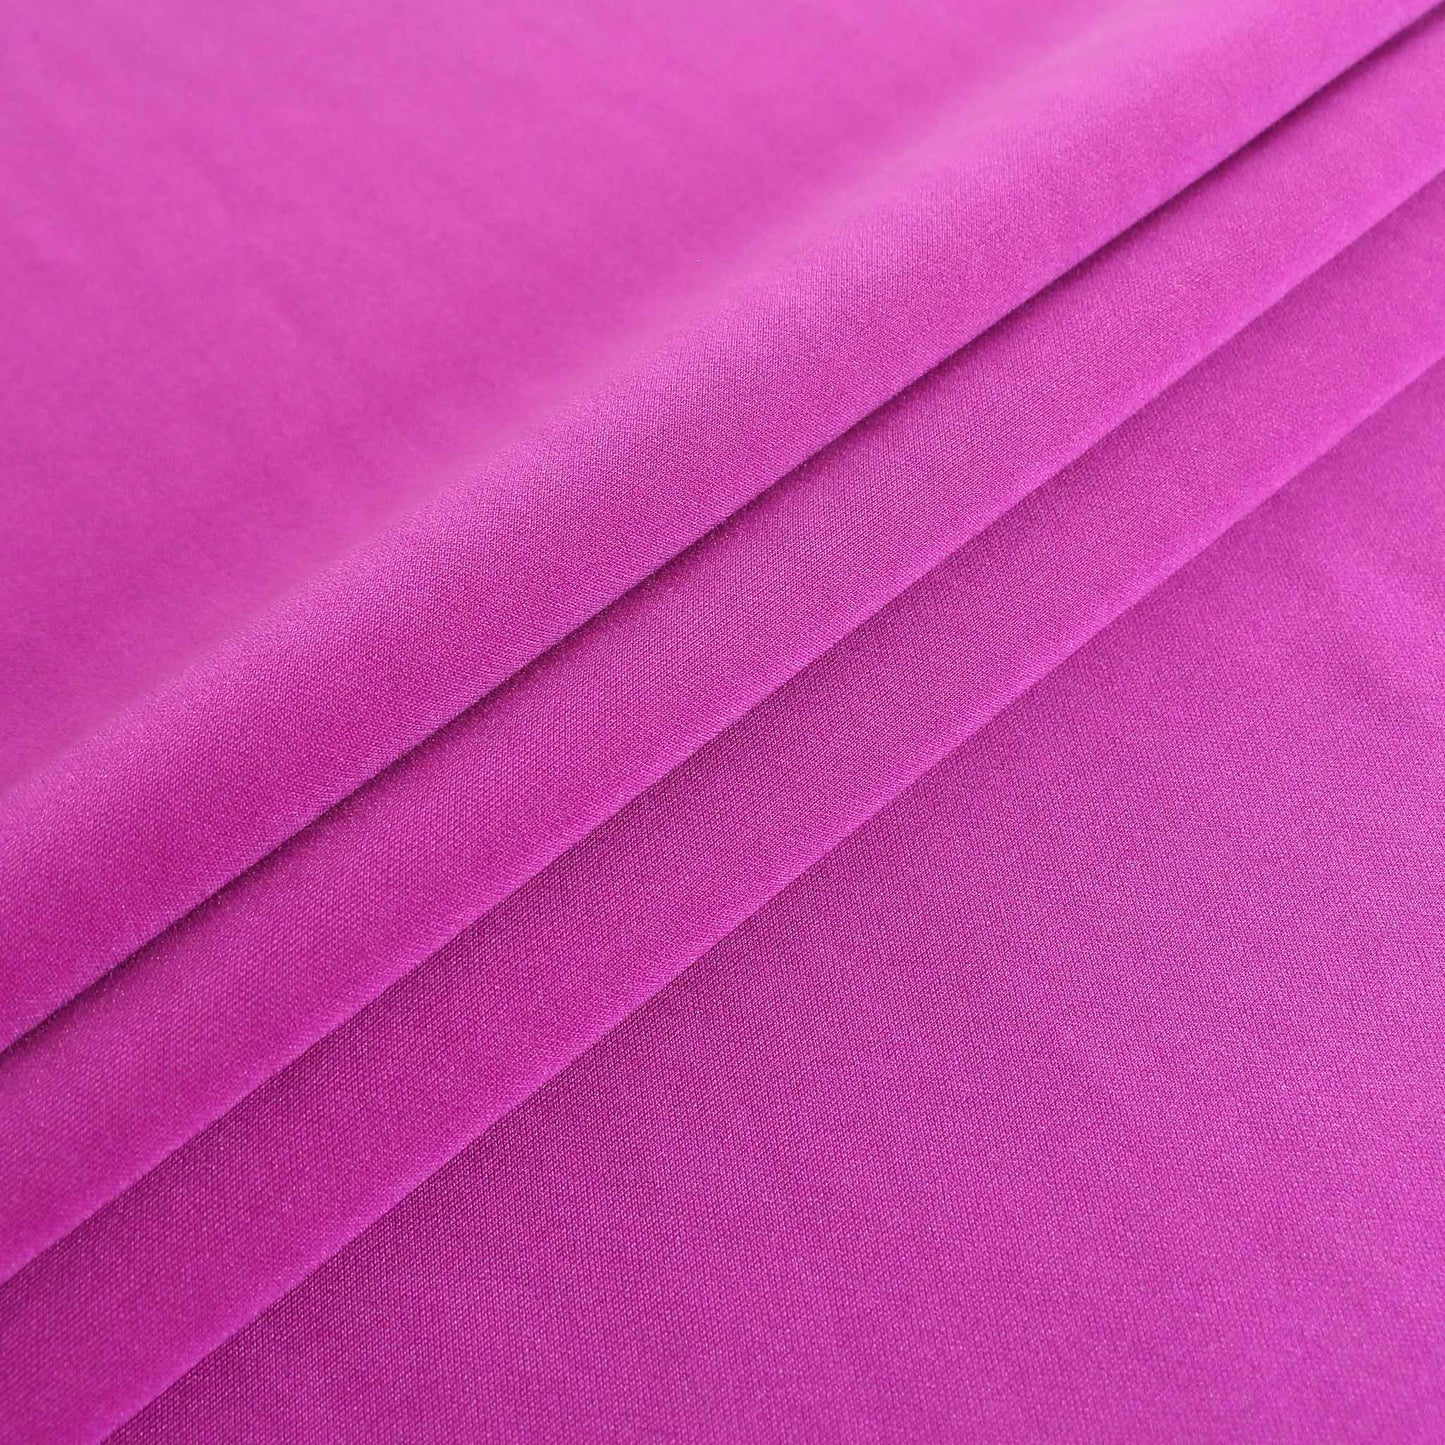 stretchy jersey scuba fabric for dressmaking in purple colour